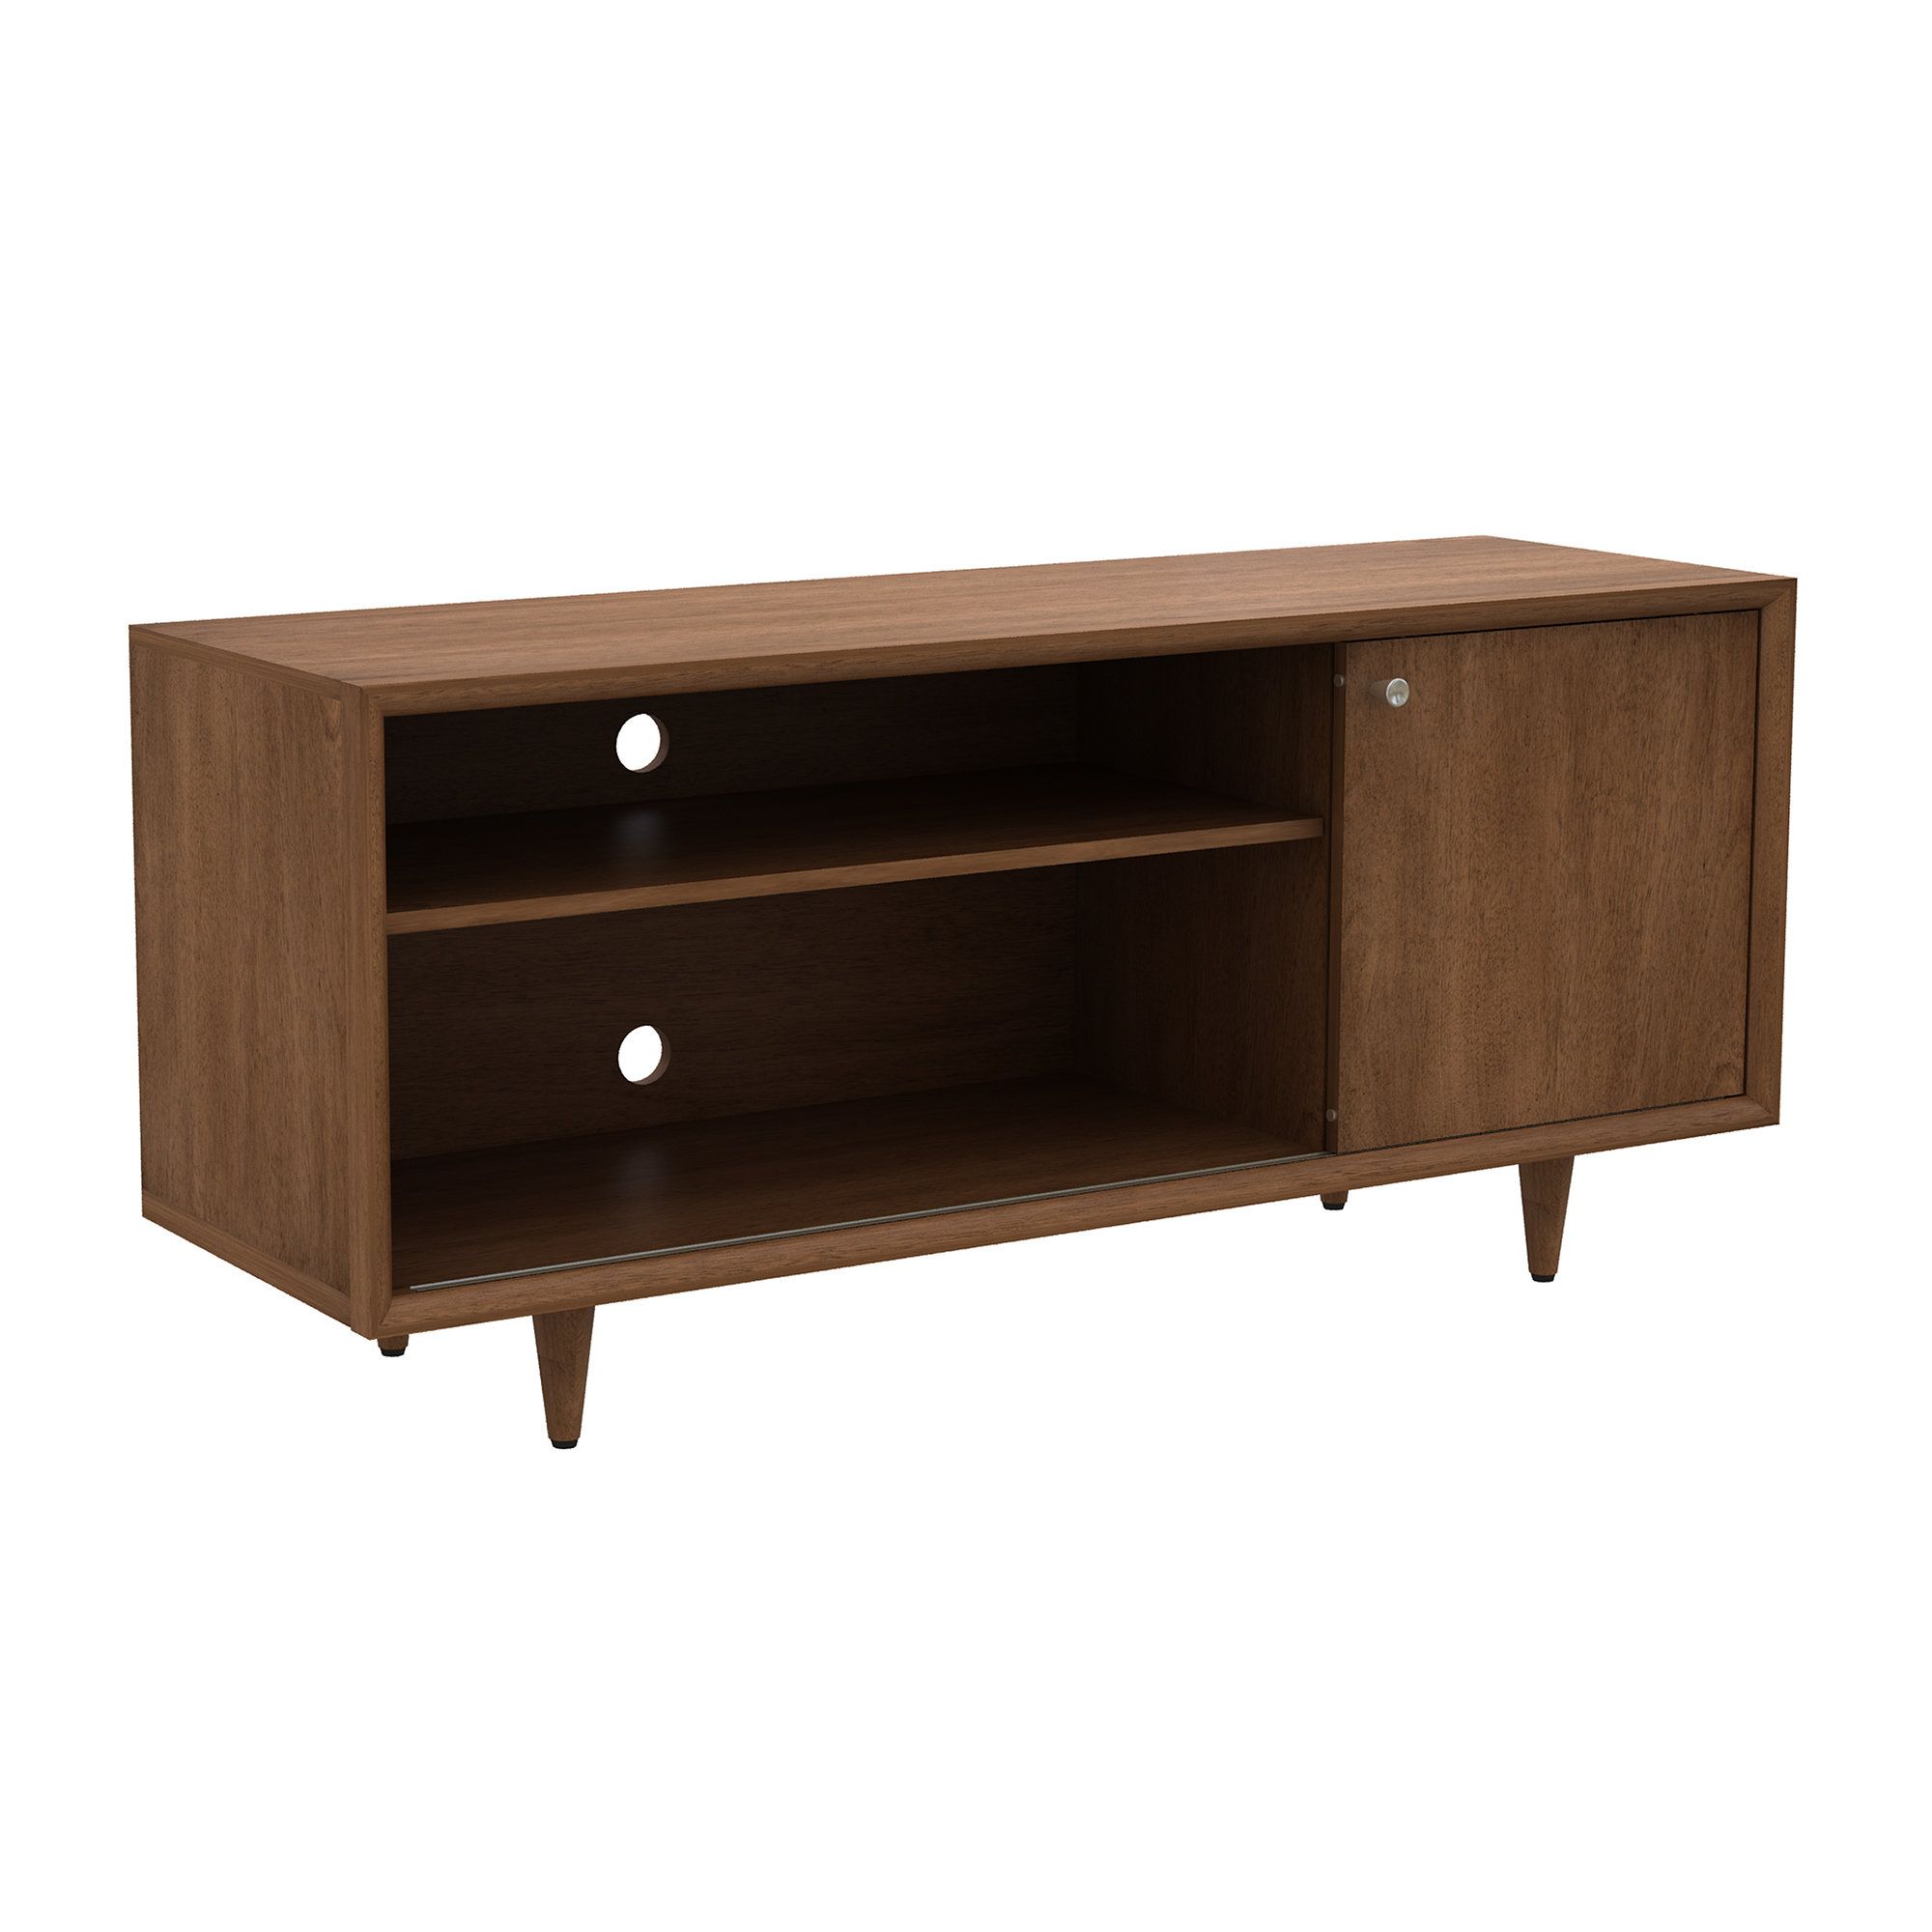 Modern Wooden Tv Stands Intended For Widely Used Modern Wood Tv Stands (View 9 of 20)